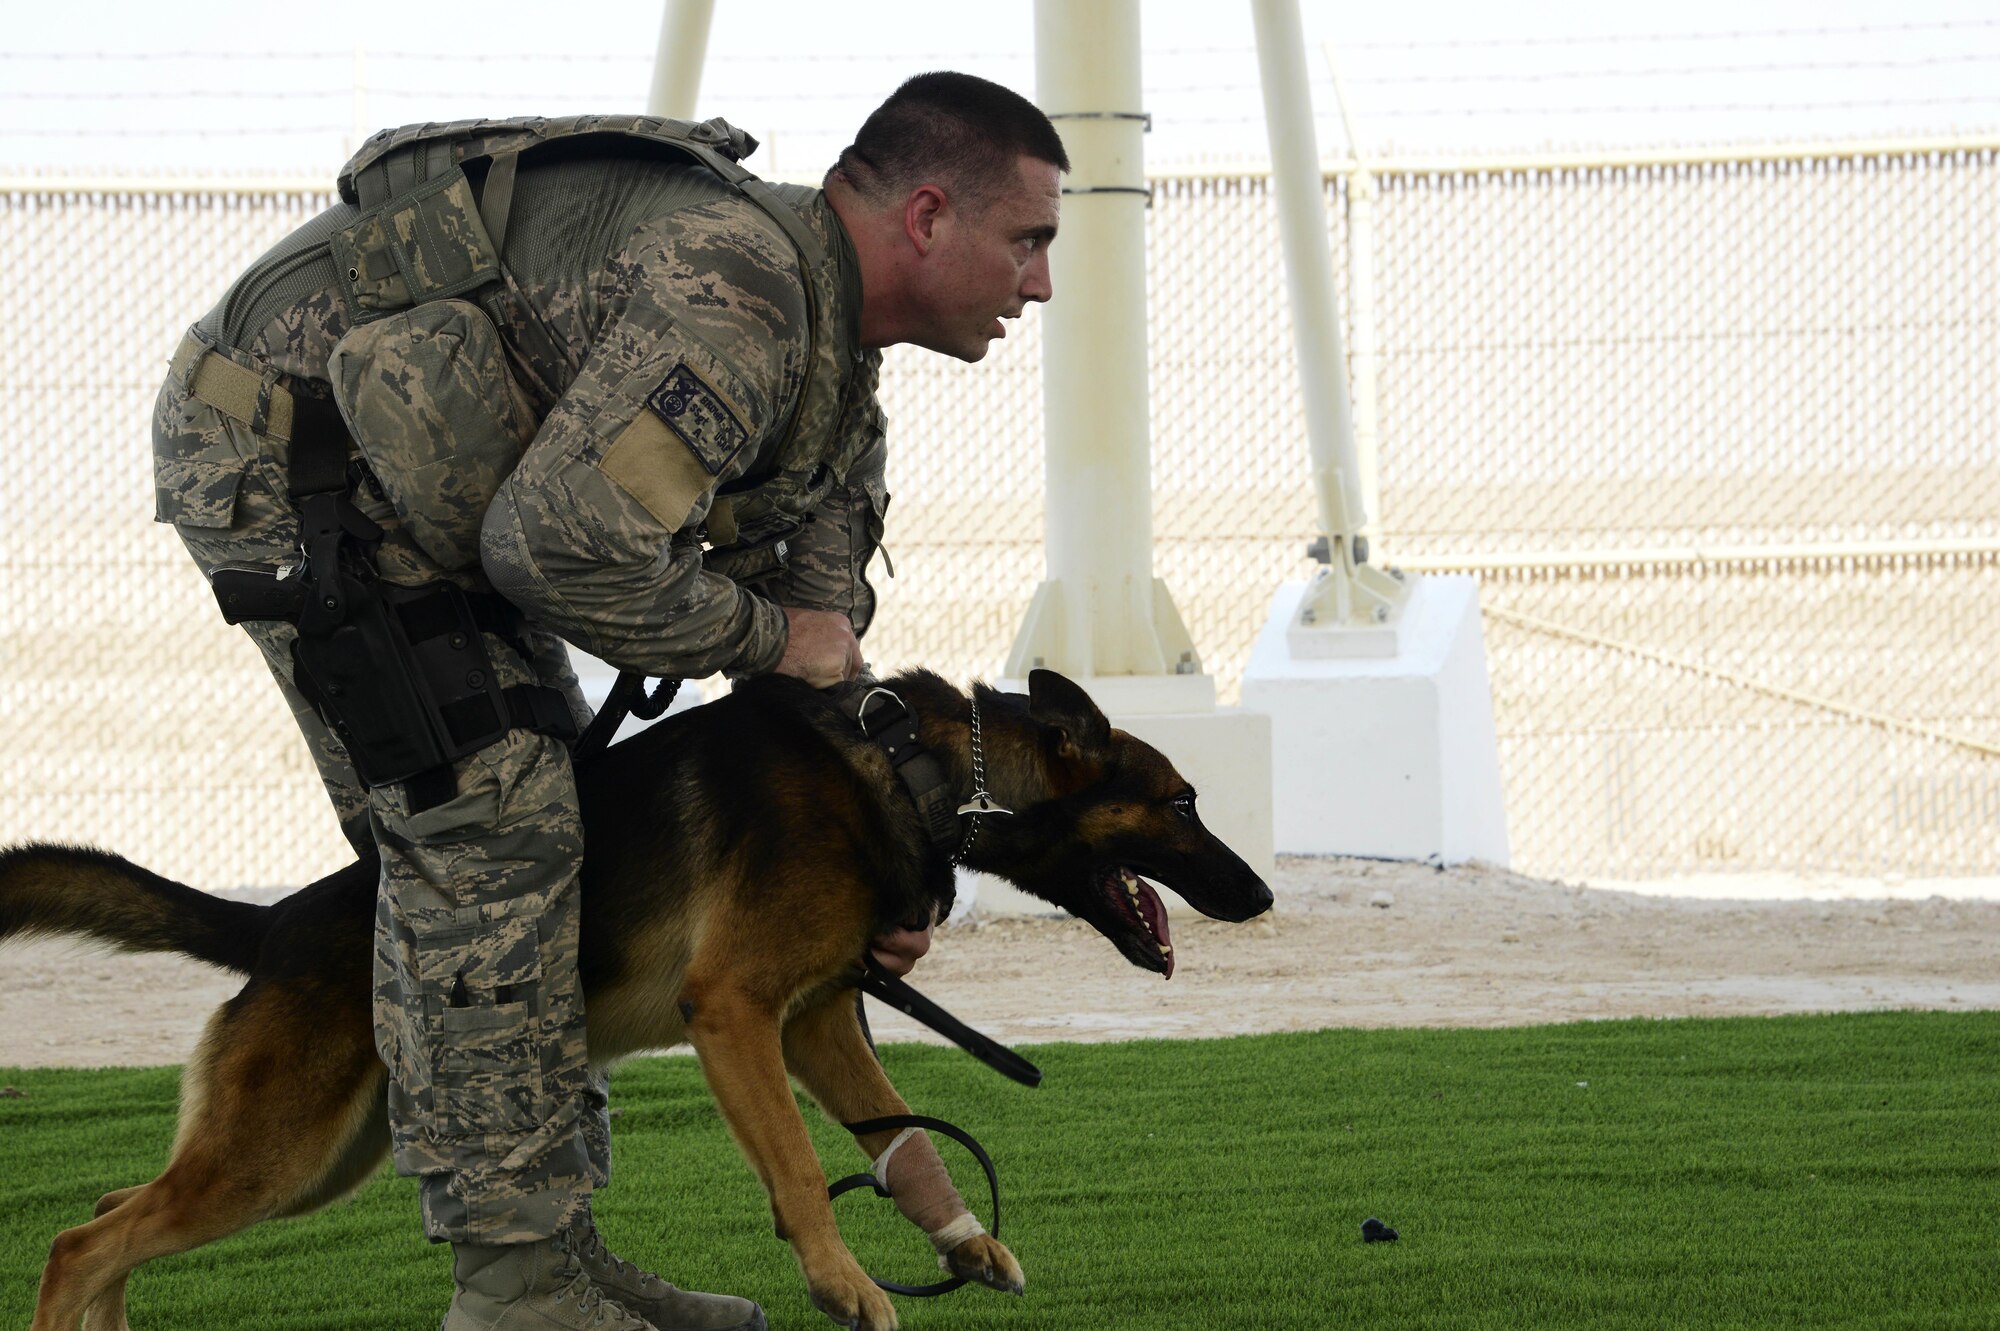 Staff Sgt. Jacob Brown, 379th Expeditionary Security Forces Squadron military working dog handler, restrains his dog, Grim, during training Sept. 15, 2016, at Al Udeid Air Base, Qatar. MWD’s main mission at AUAB is to maintain a secure operating environment by preventing the introduction of explosives onto the base through explosive detection. (U.S. Air Force photo/Senior Airman Janelle Patiño/Released)